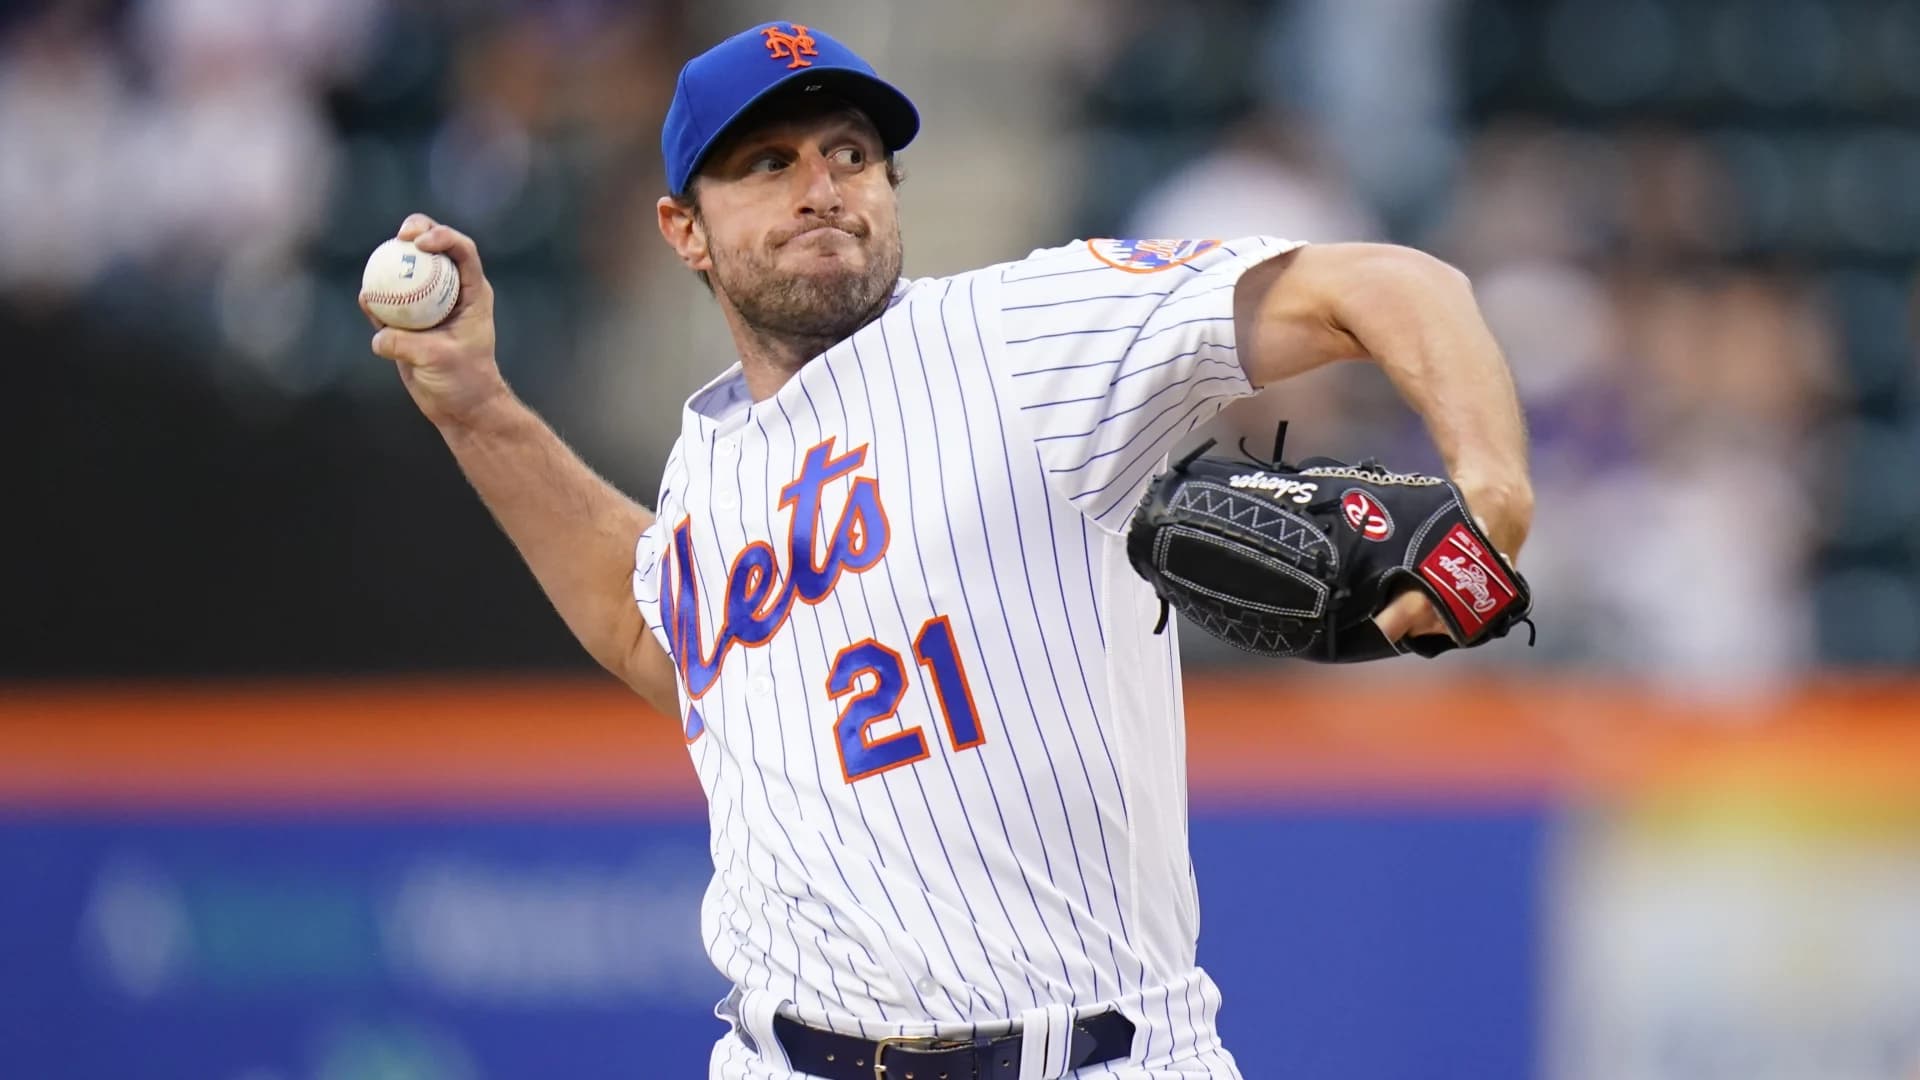 Mets ace Scherzer likely out 6 to 8 weeks for oblique strain